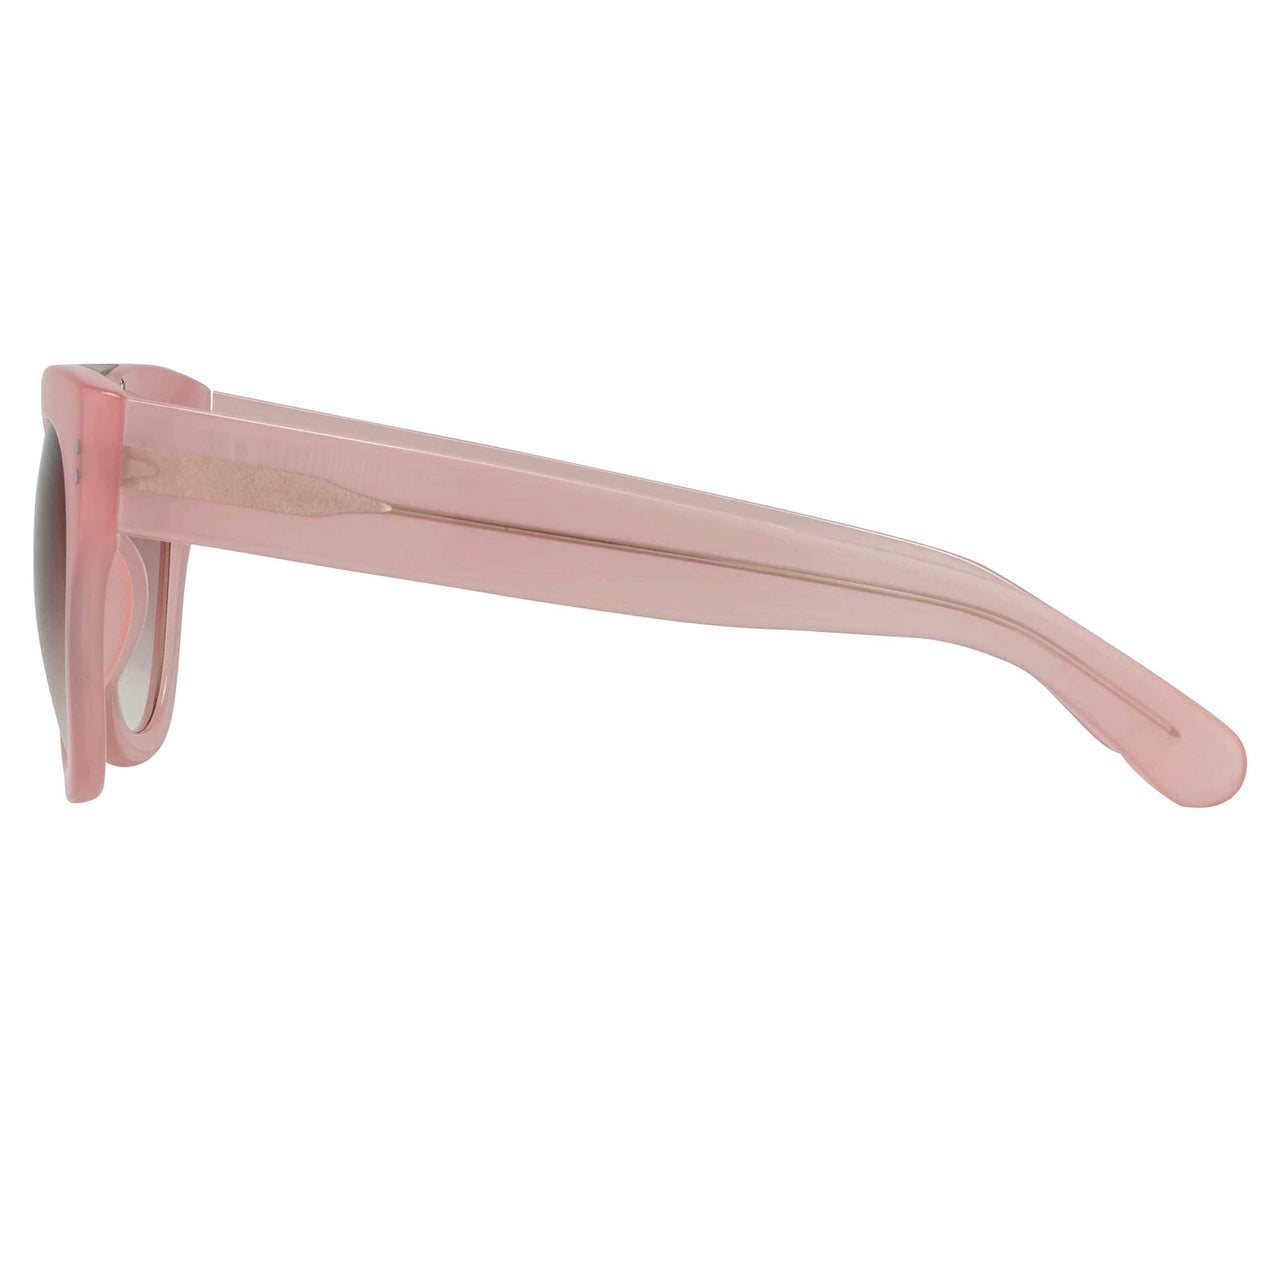 Erdem Women Sunglasses D-Frame Pale Pink with Rose Graduated Lenses EDM11C5SUN - Watches & Crystals